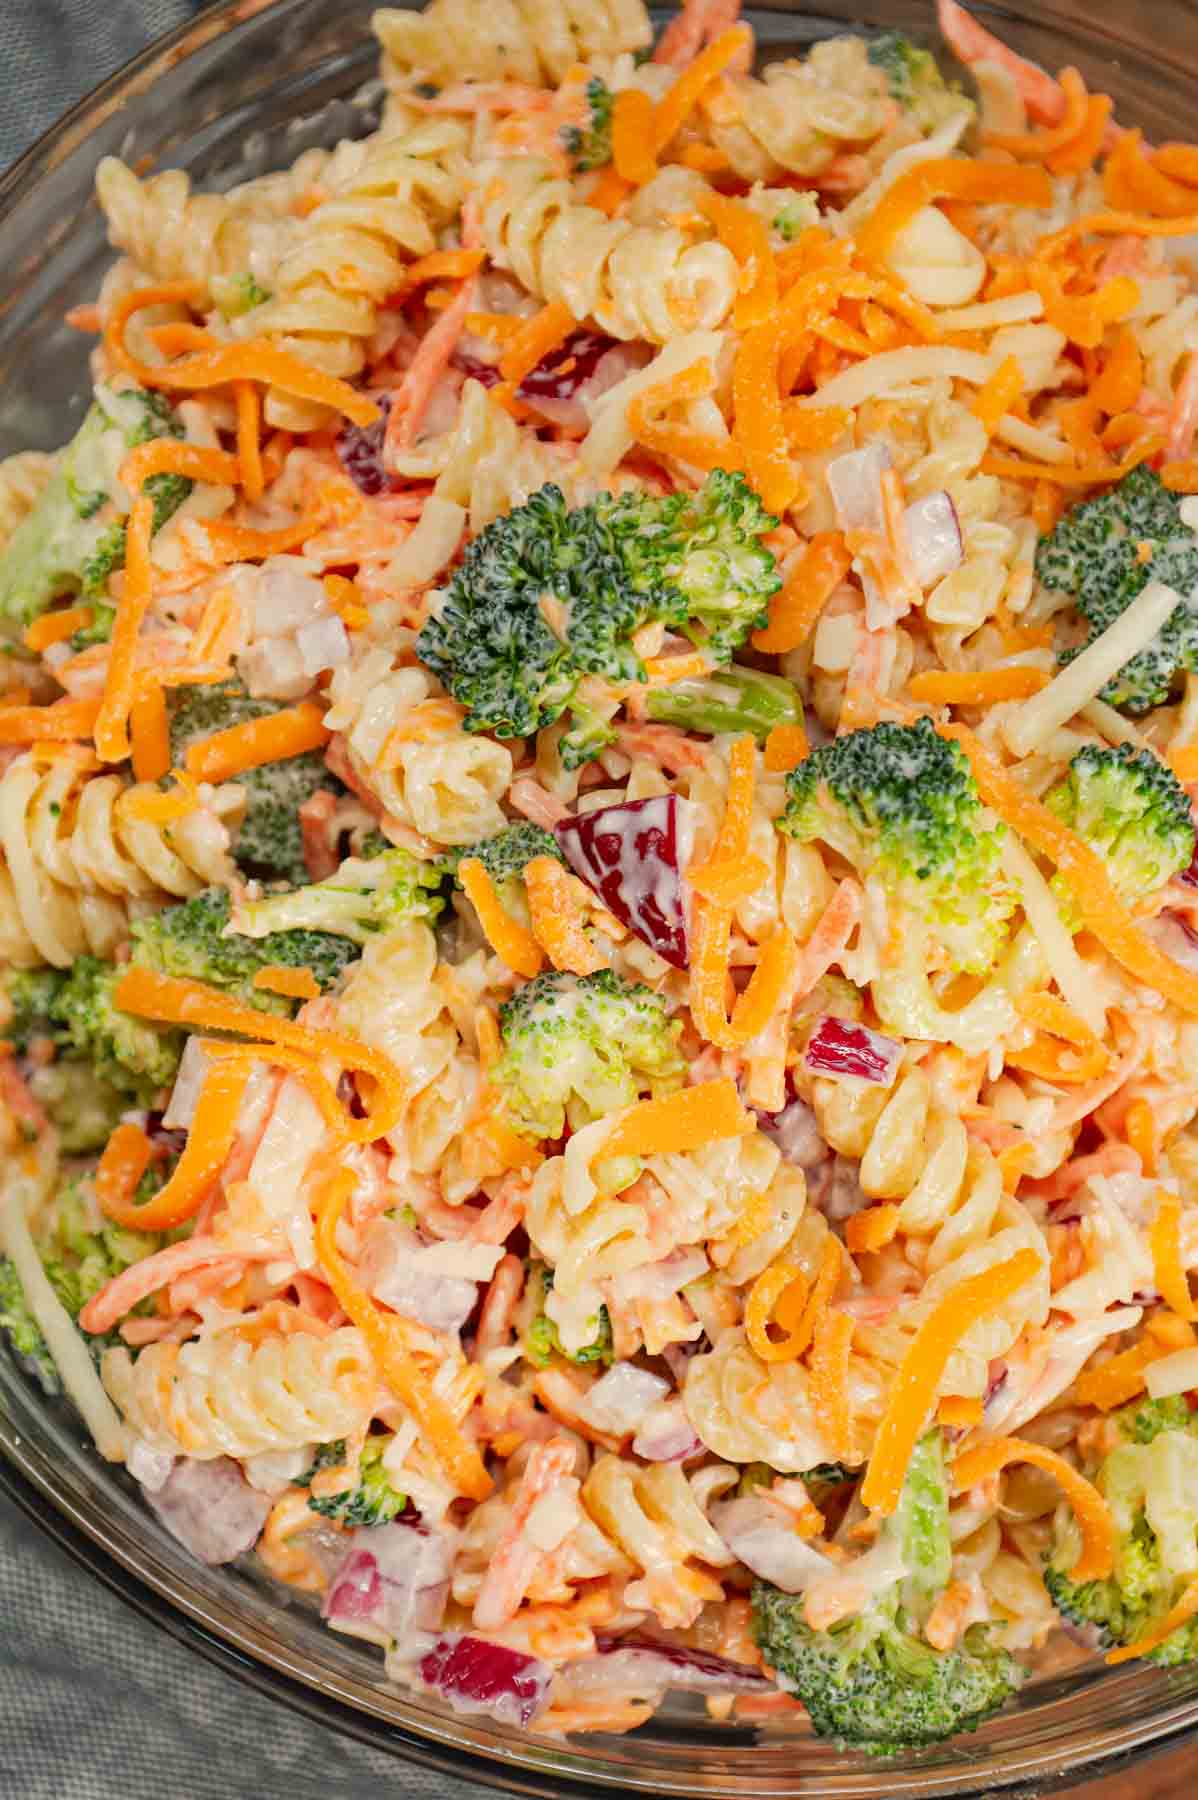 Broccoli Cheddar Pasta Salad is a tasty cold side dish recipe loaded with rotini pasta, broccoli florets, red onions, shredded carrots, cheddar cheese and parmesan all tossed in a mayo and ranch dressing mixture.